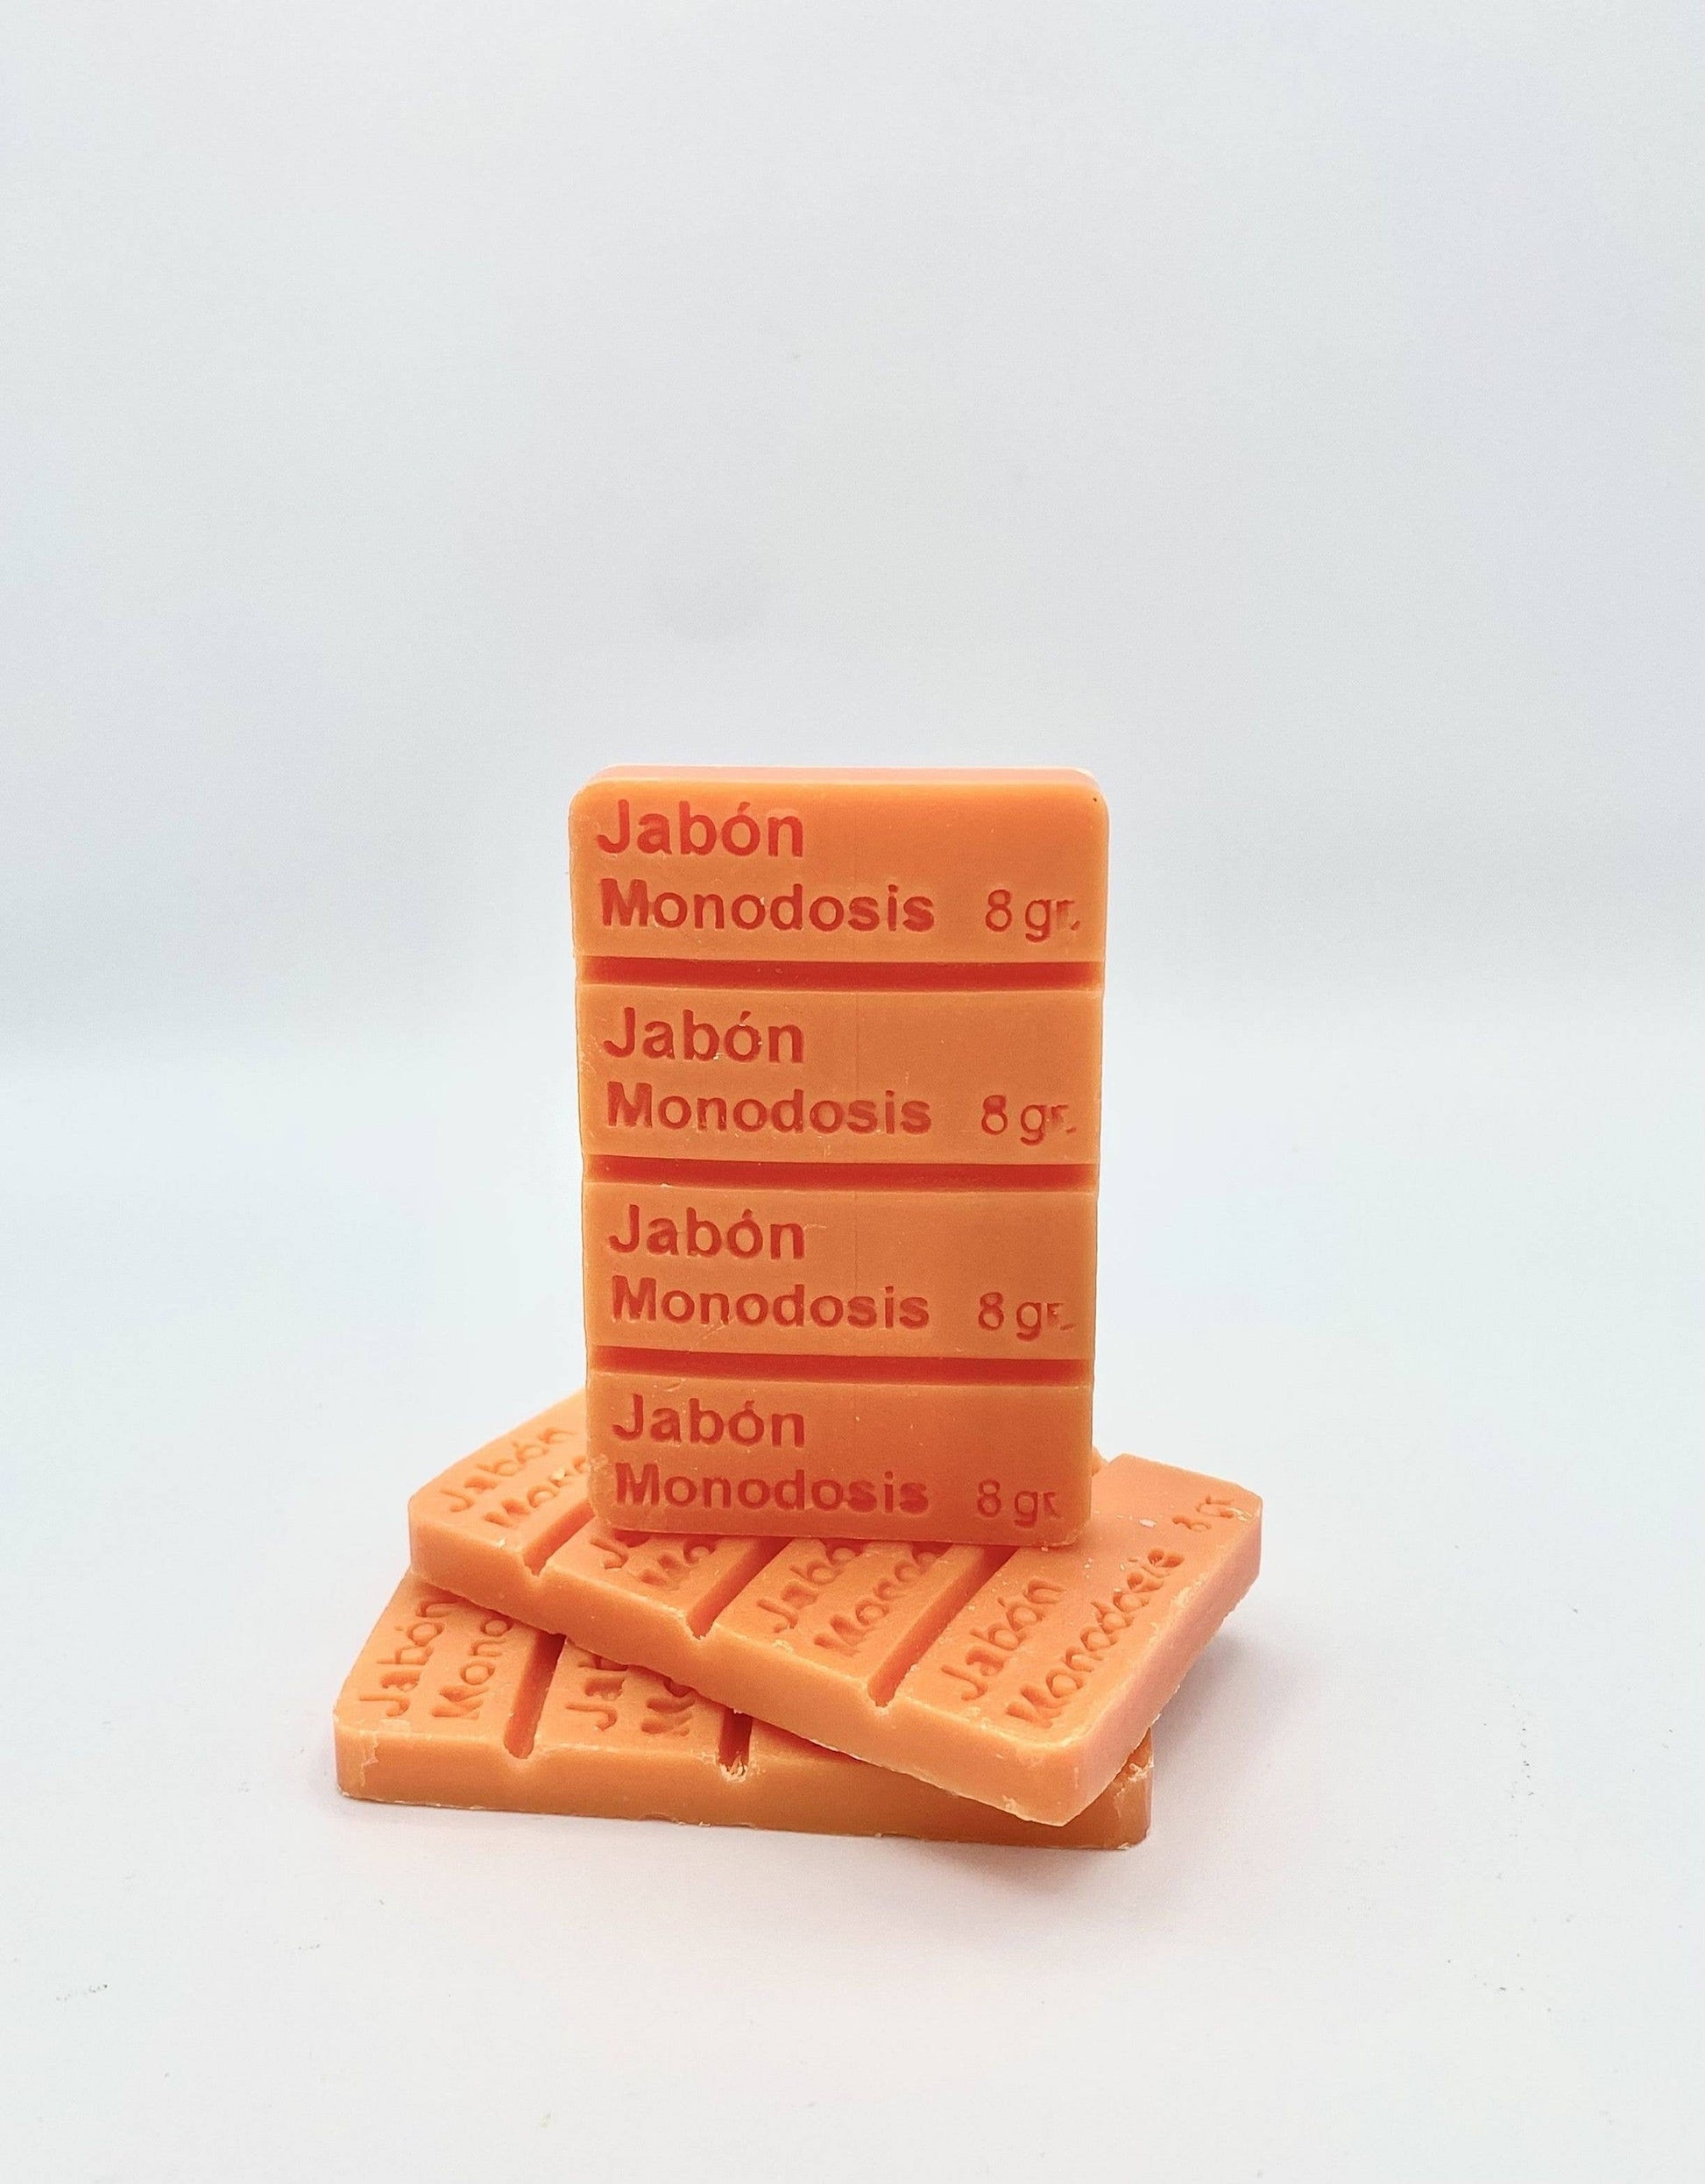 Tangerine soap by Iberica made in Spain